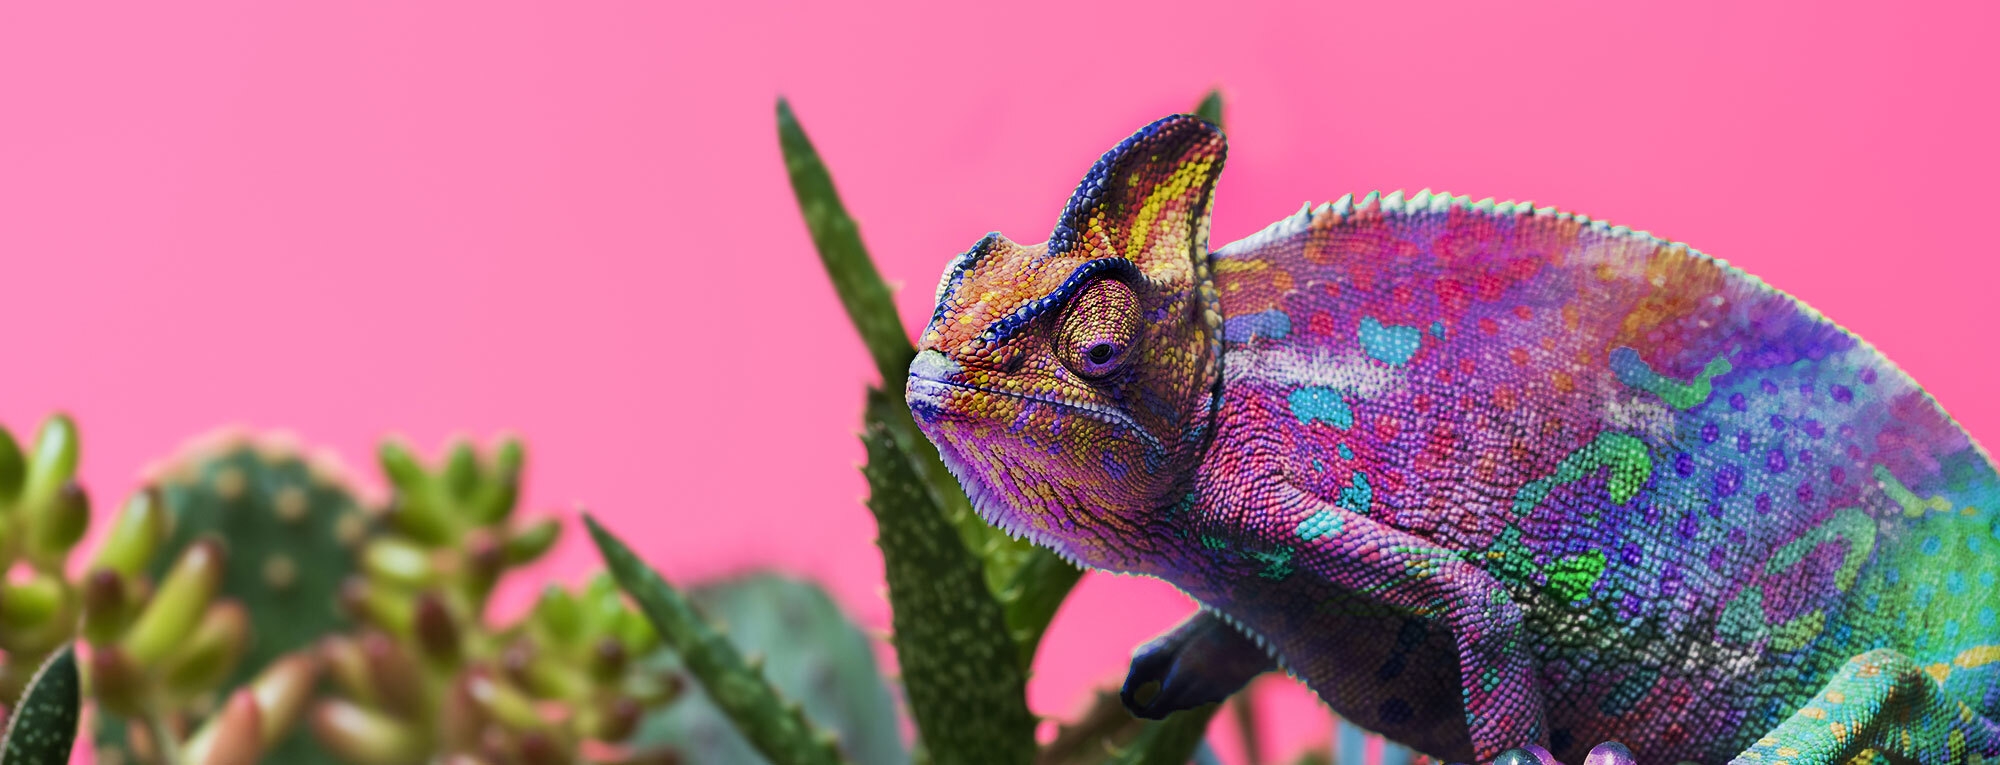 Chameleon colorized in photoshop